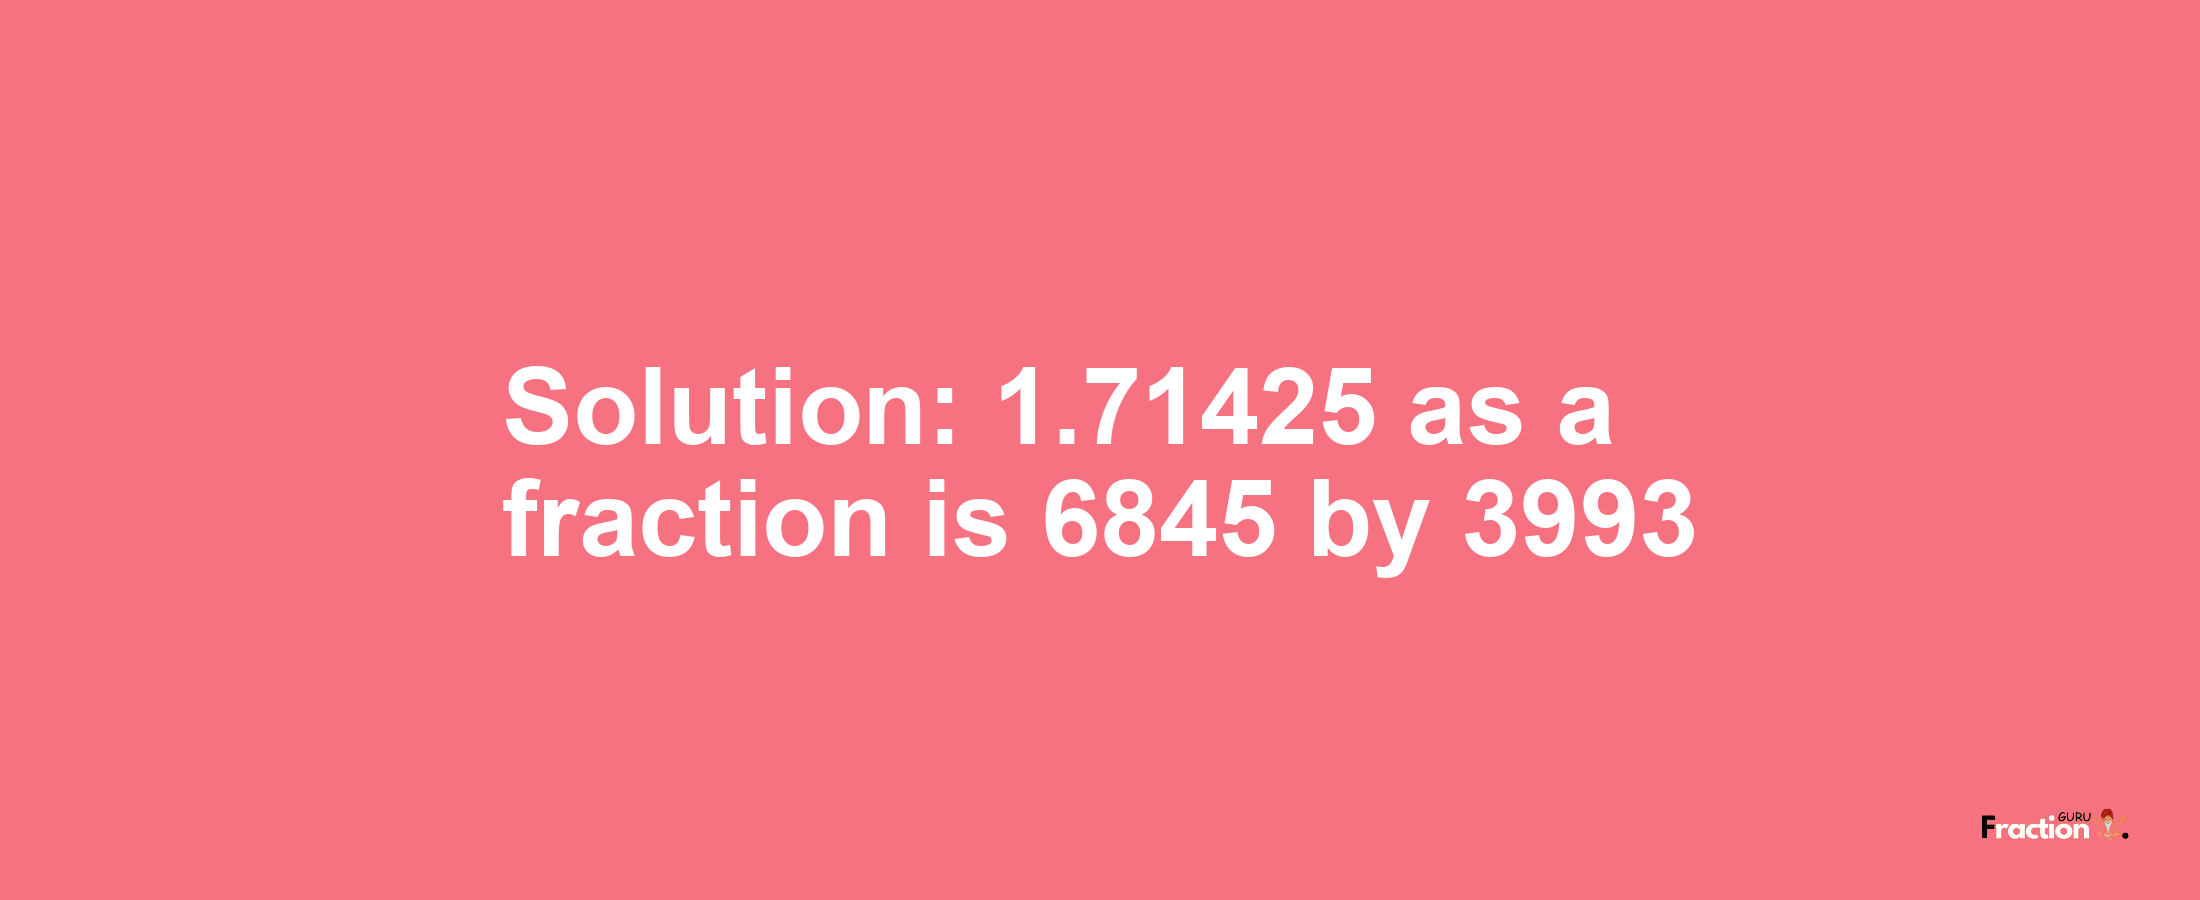 Solution:1.71425 as a fraction is 6845/3993